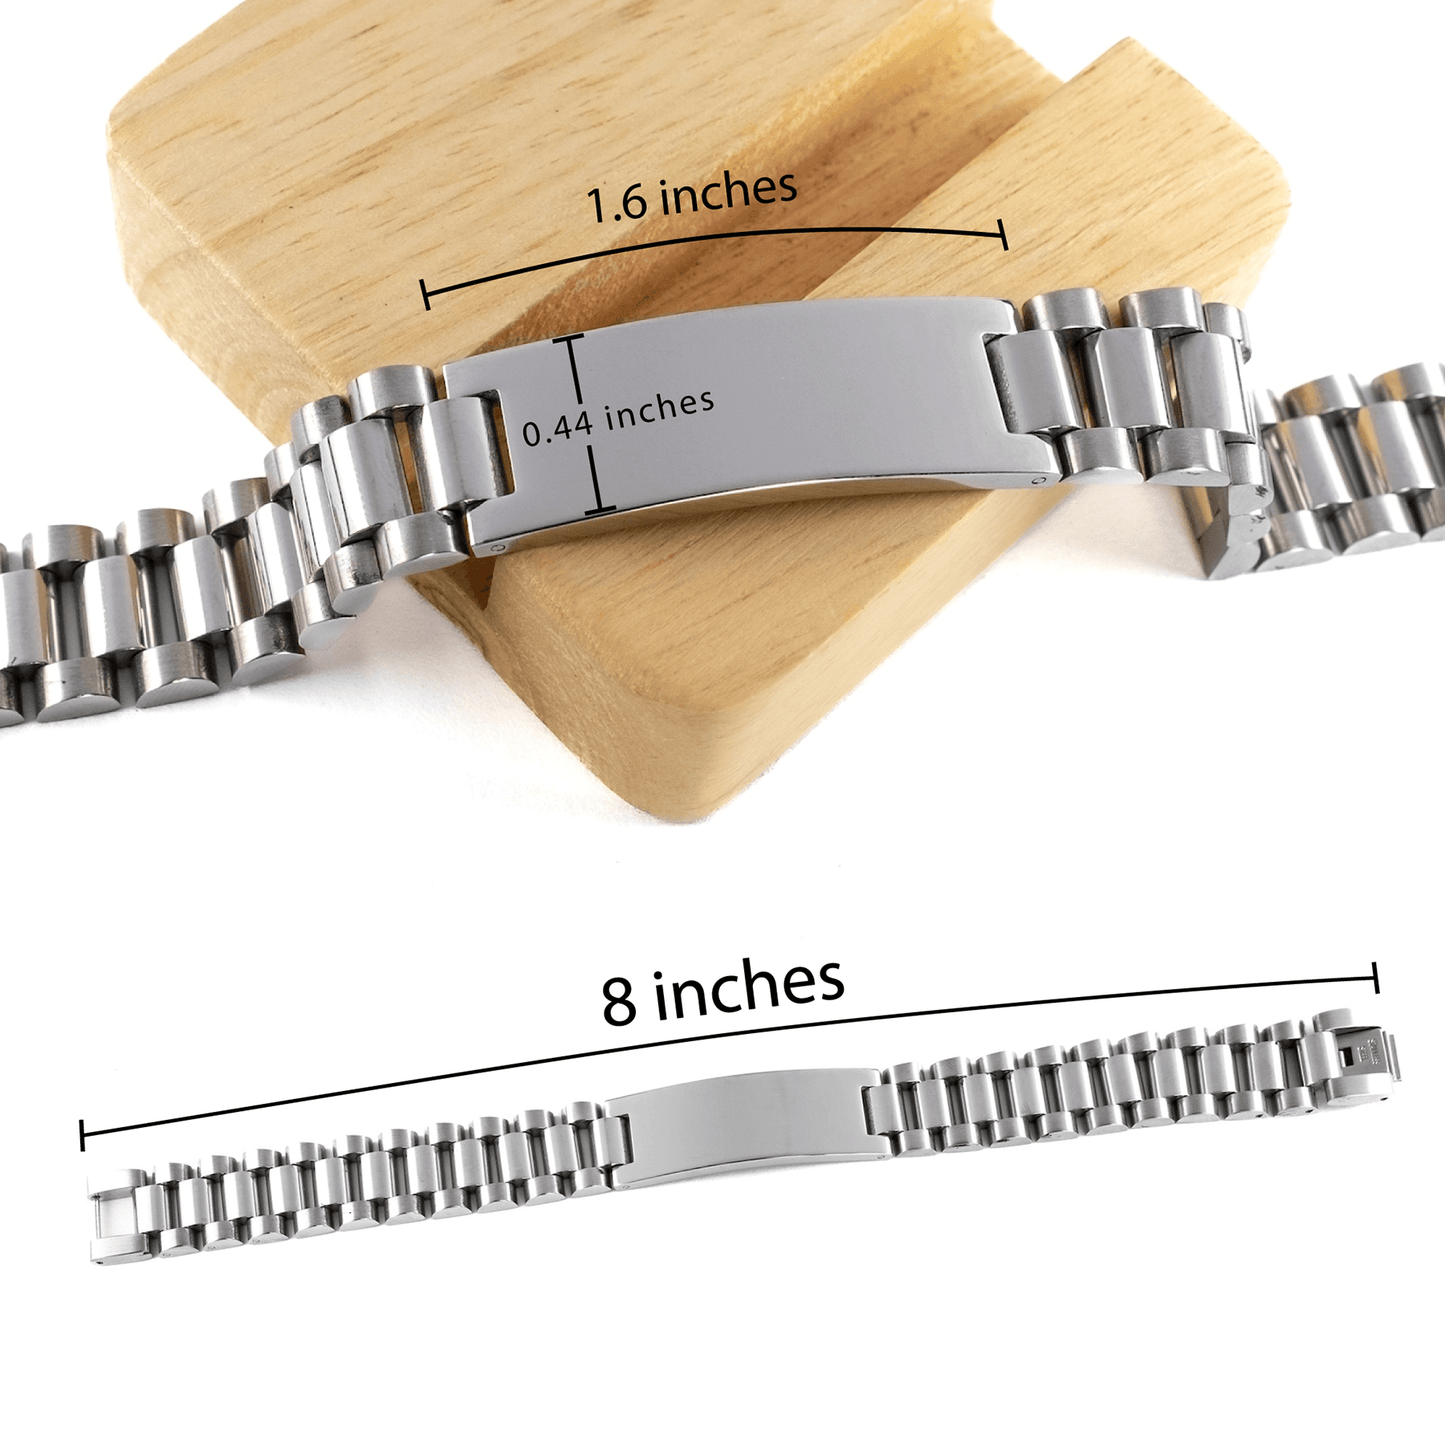 Sarcastic Correctional Officer Ladder Stainless Steel Bracelet Gifts, Christmas Holiday Gifts for Correctional Officer Birthday, Correctional Officer: Because greatness is woven into the fabric of every day, Coworkers, Friends - Mallard Moon Gift Shop